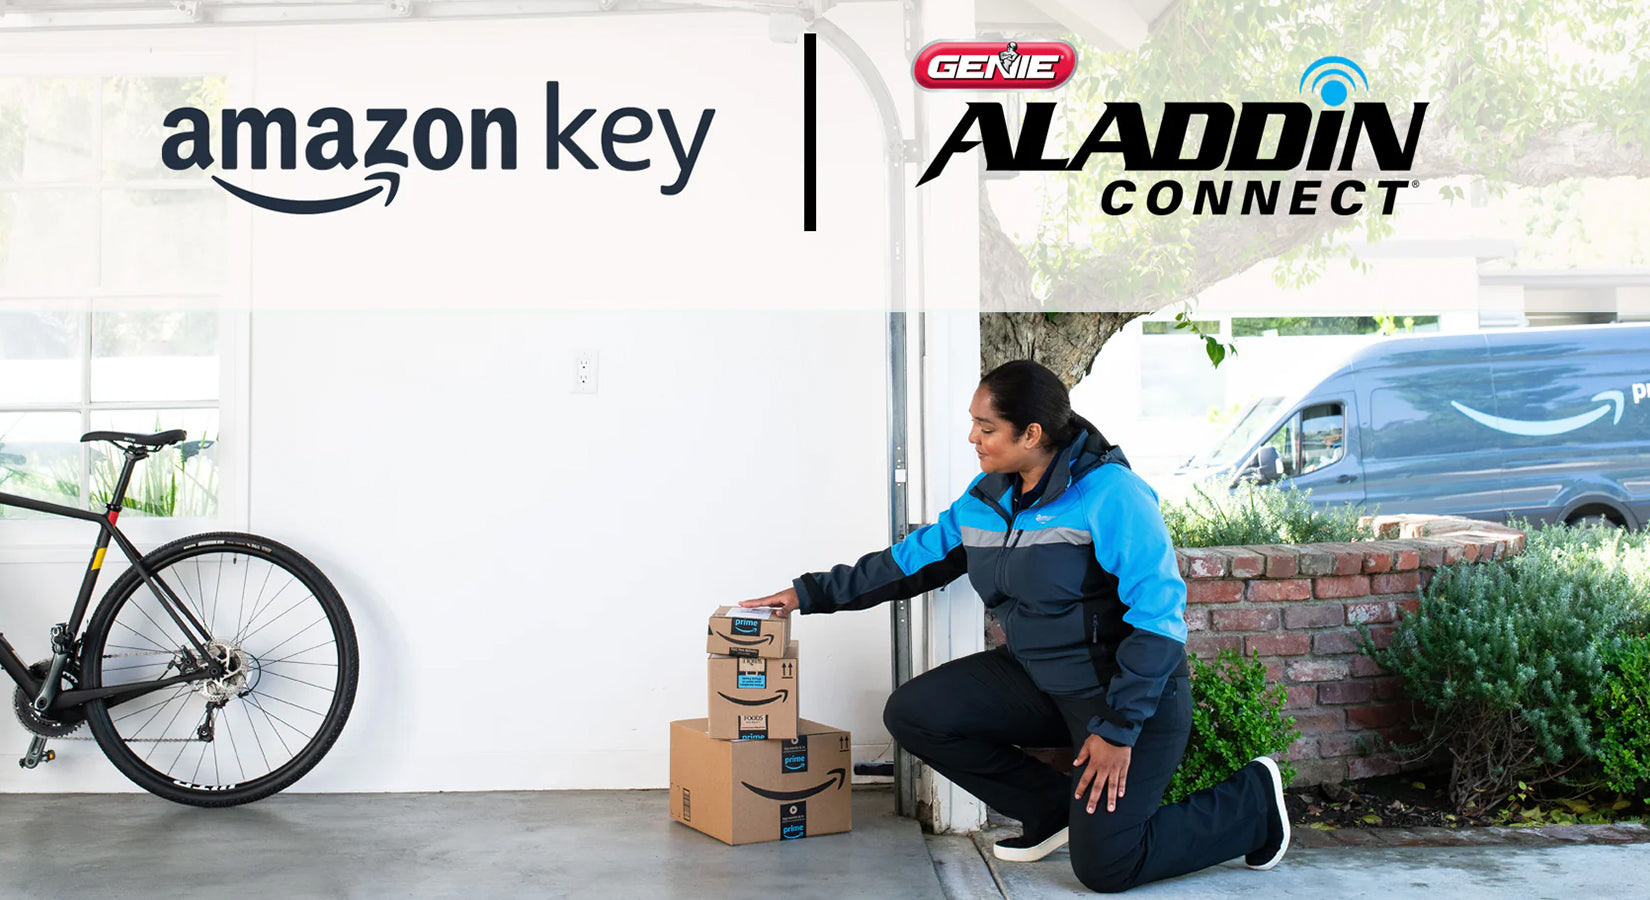 Genie Aladdin Connect Now Works with Amazon Key | All Security Equipment